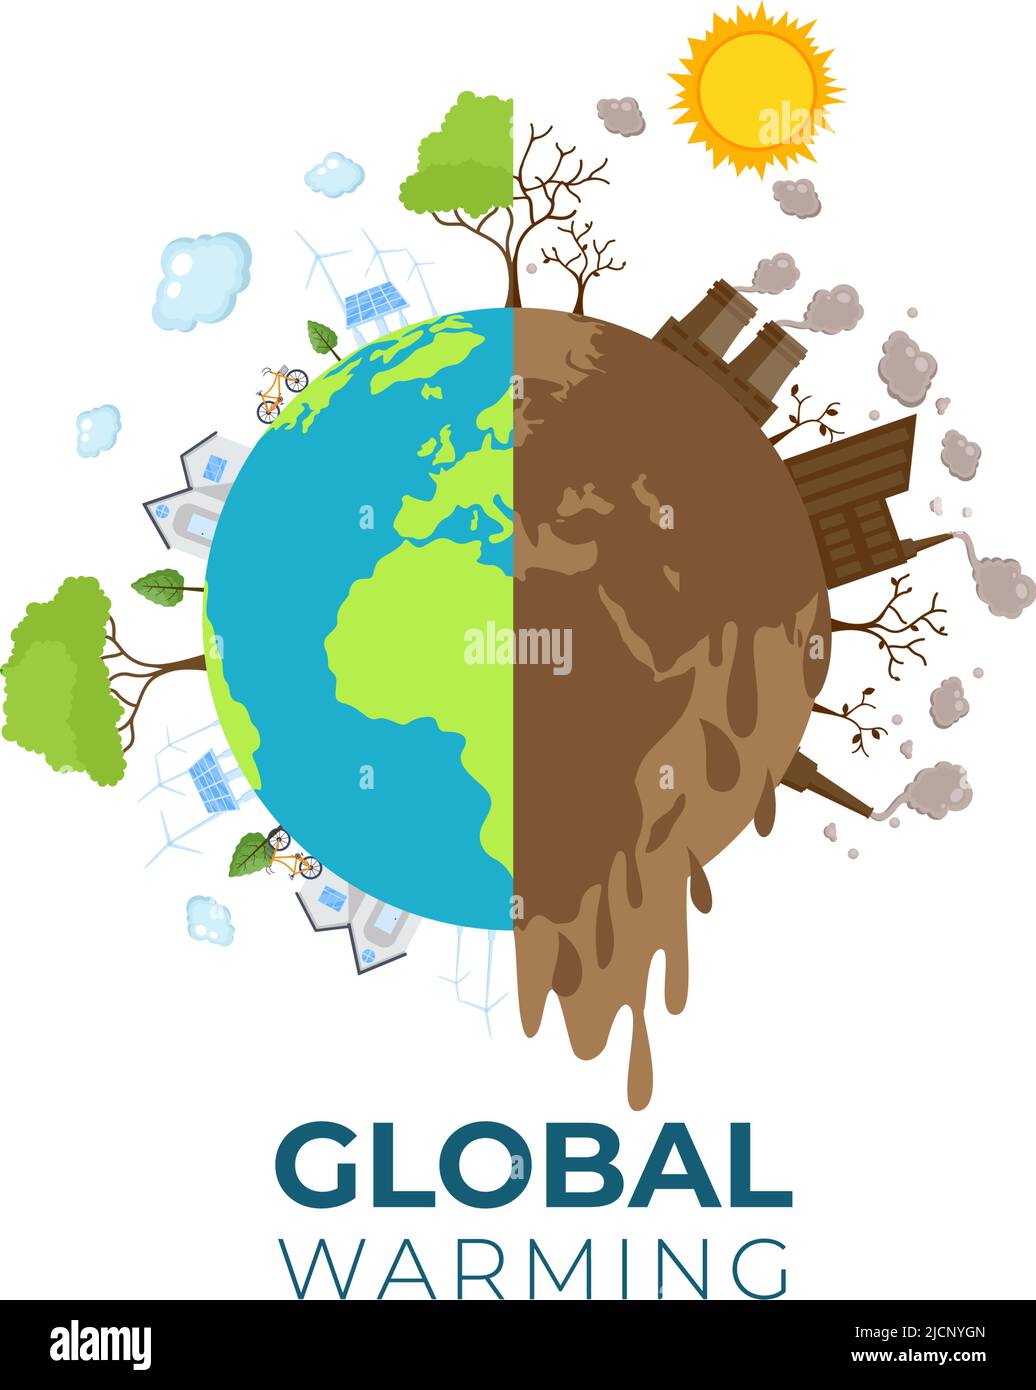 Global Warming Cartoon Style Illustration with Planet Earth in a Melting or Burning State and Image Sun to Prevent Damage to Nature and Climate Change Stock Vector